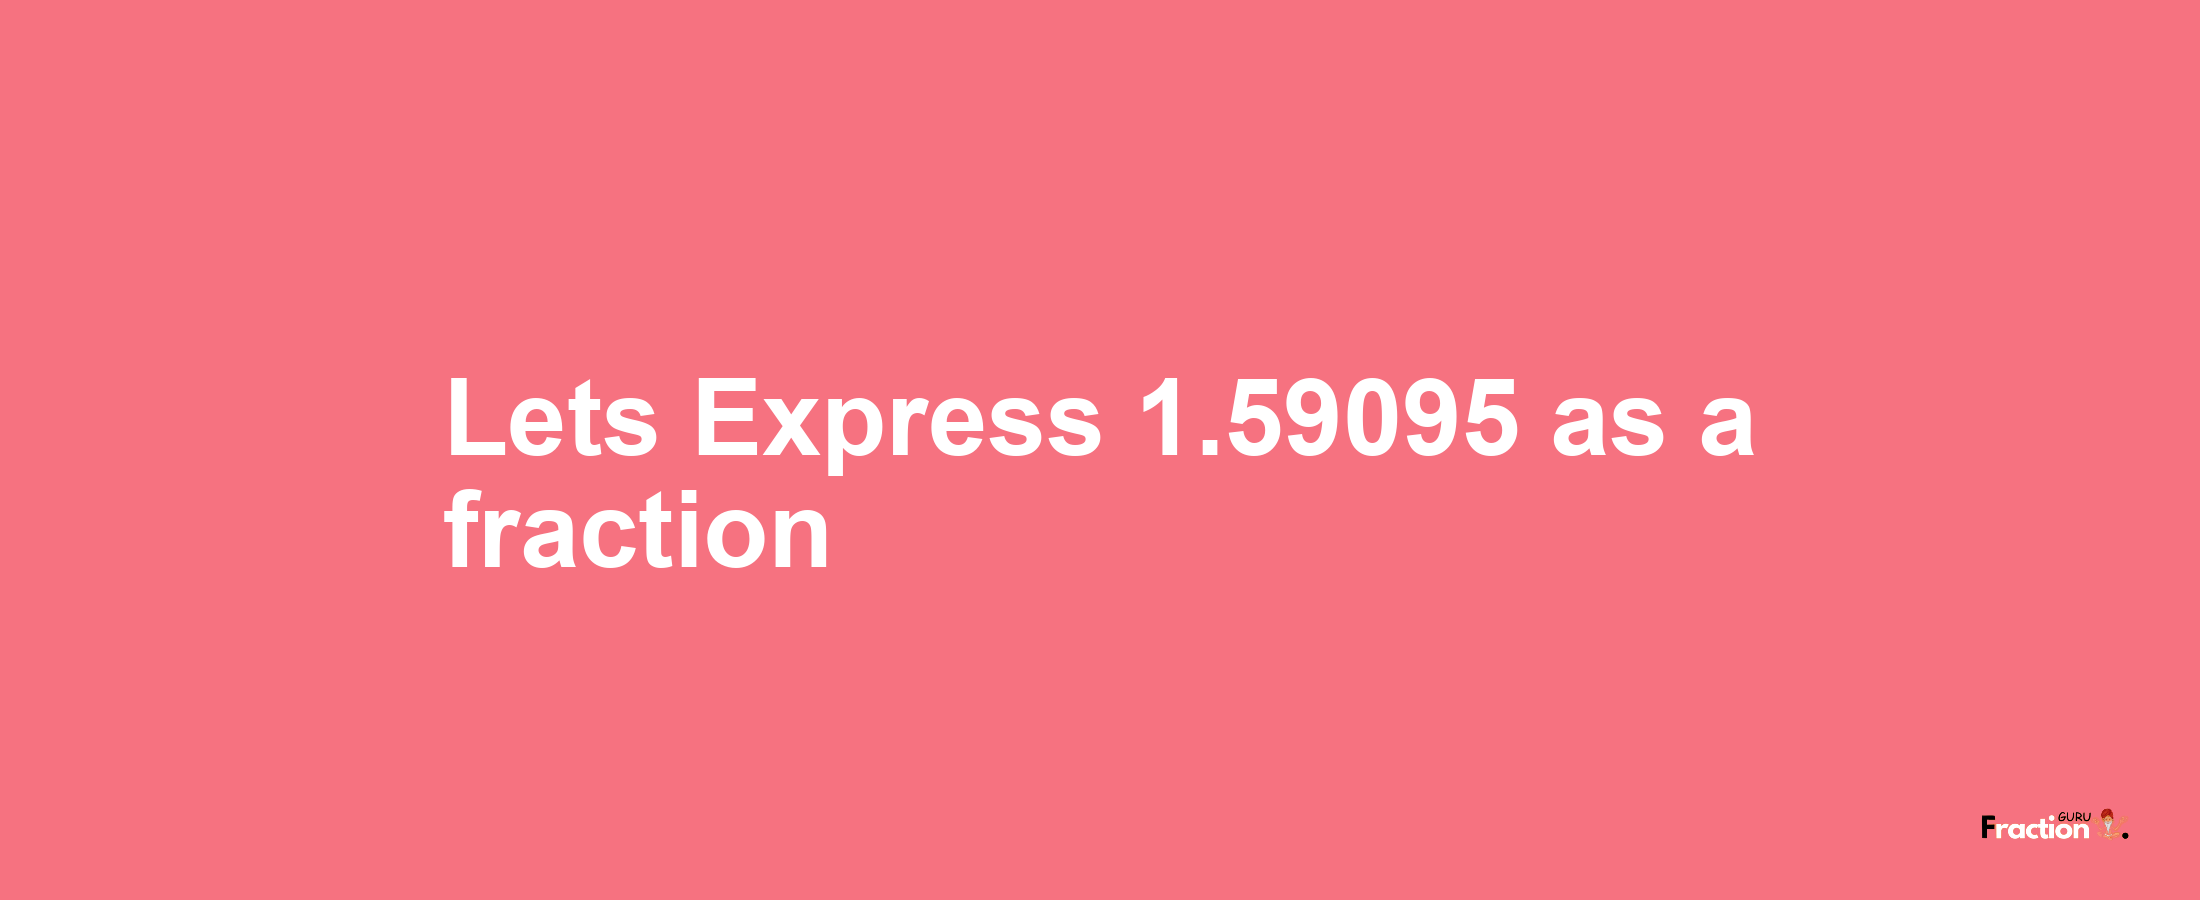 Lets Express 1.59095 as afraction